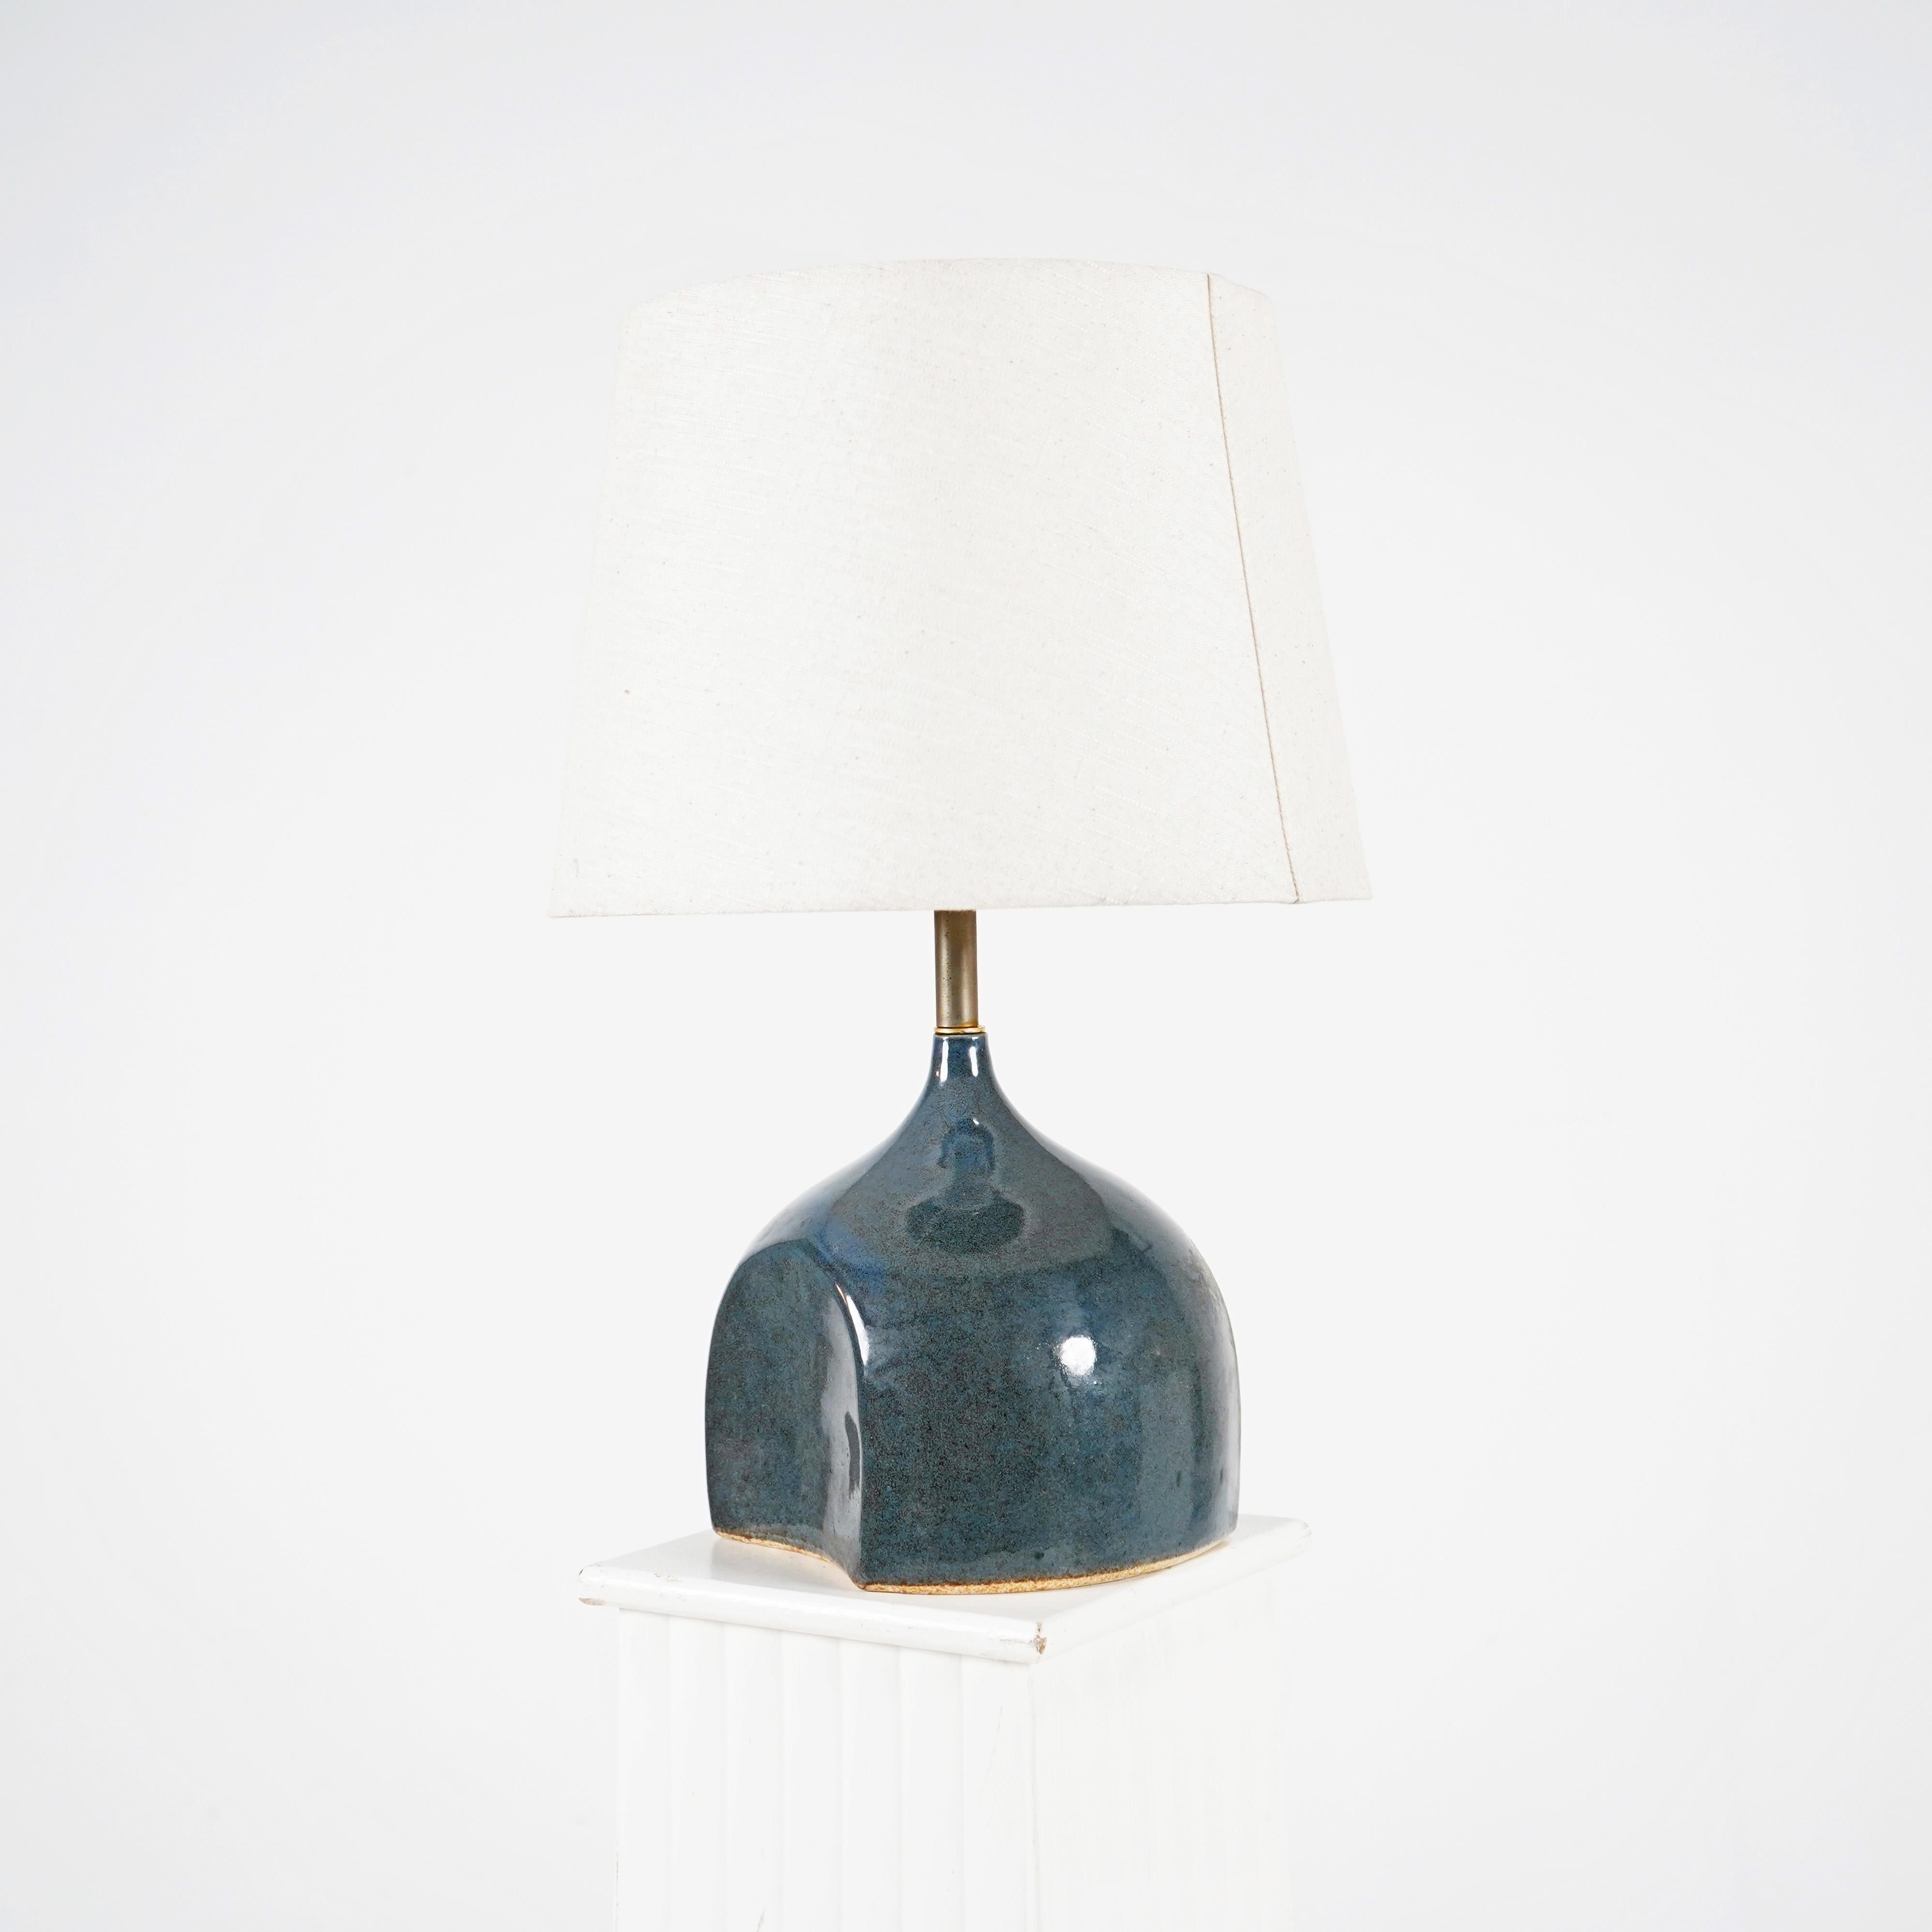 This stylish vintage French studio ceramic lamp is the perfect addition to any home. Adorned with a beautiful blue glaze and stylish design. Makers mark on the base. Rewired and PAT tested, this lamp will brighten up your home in no time. Shade is